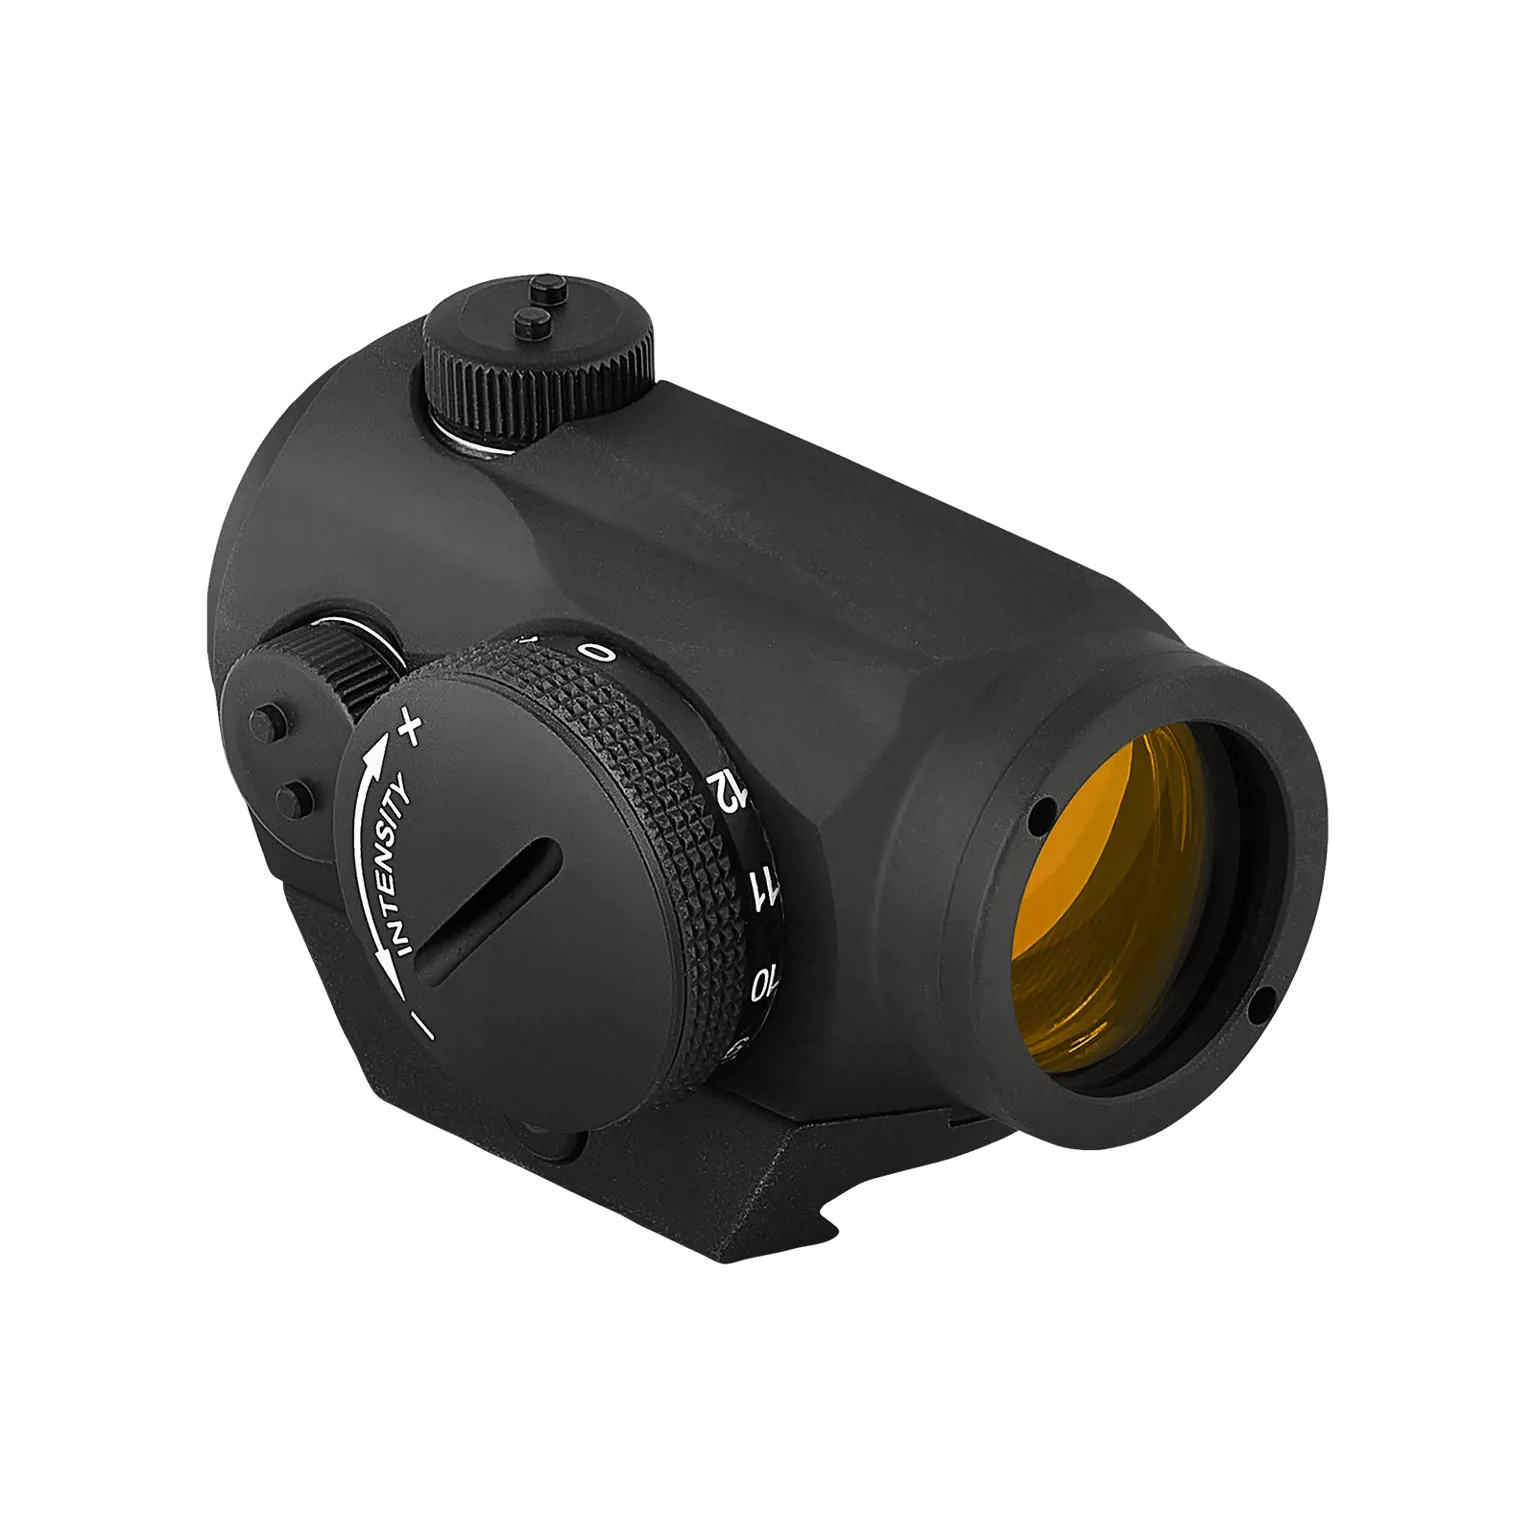 Micro H-1™ 2 MOA - Red dot reflex sight with standard mount for Weaver/Picatinny - 3